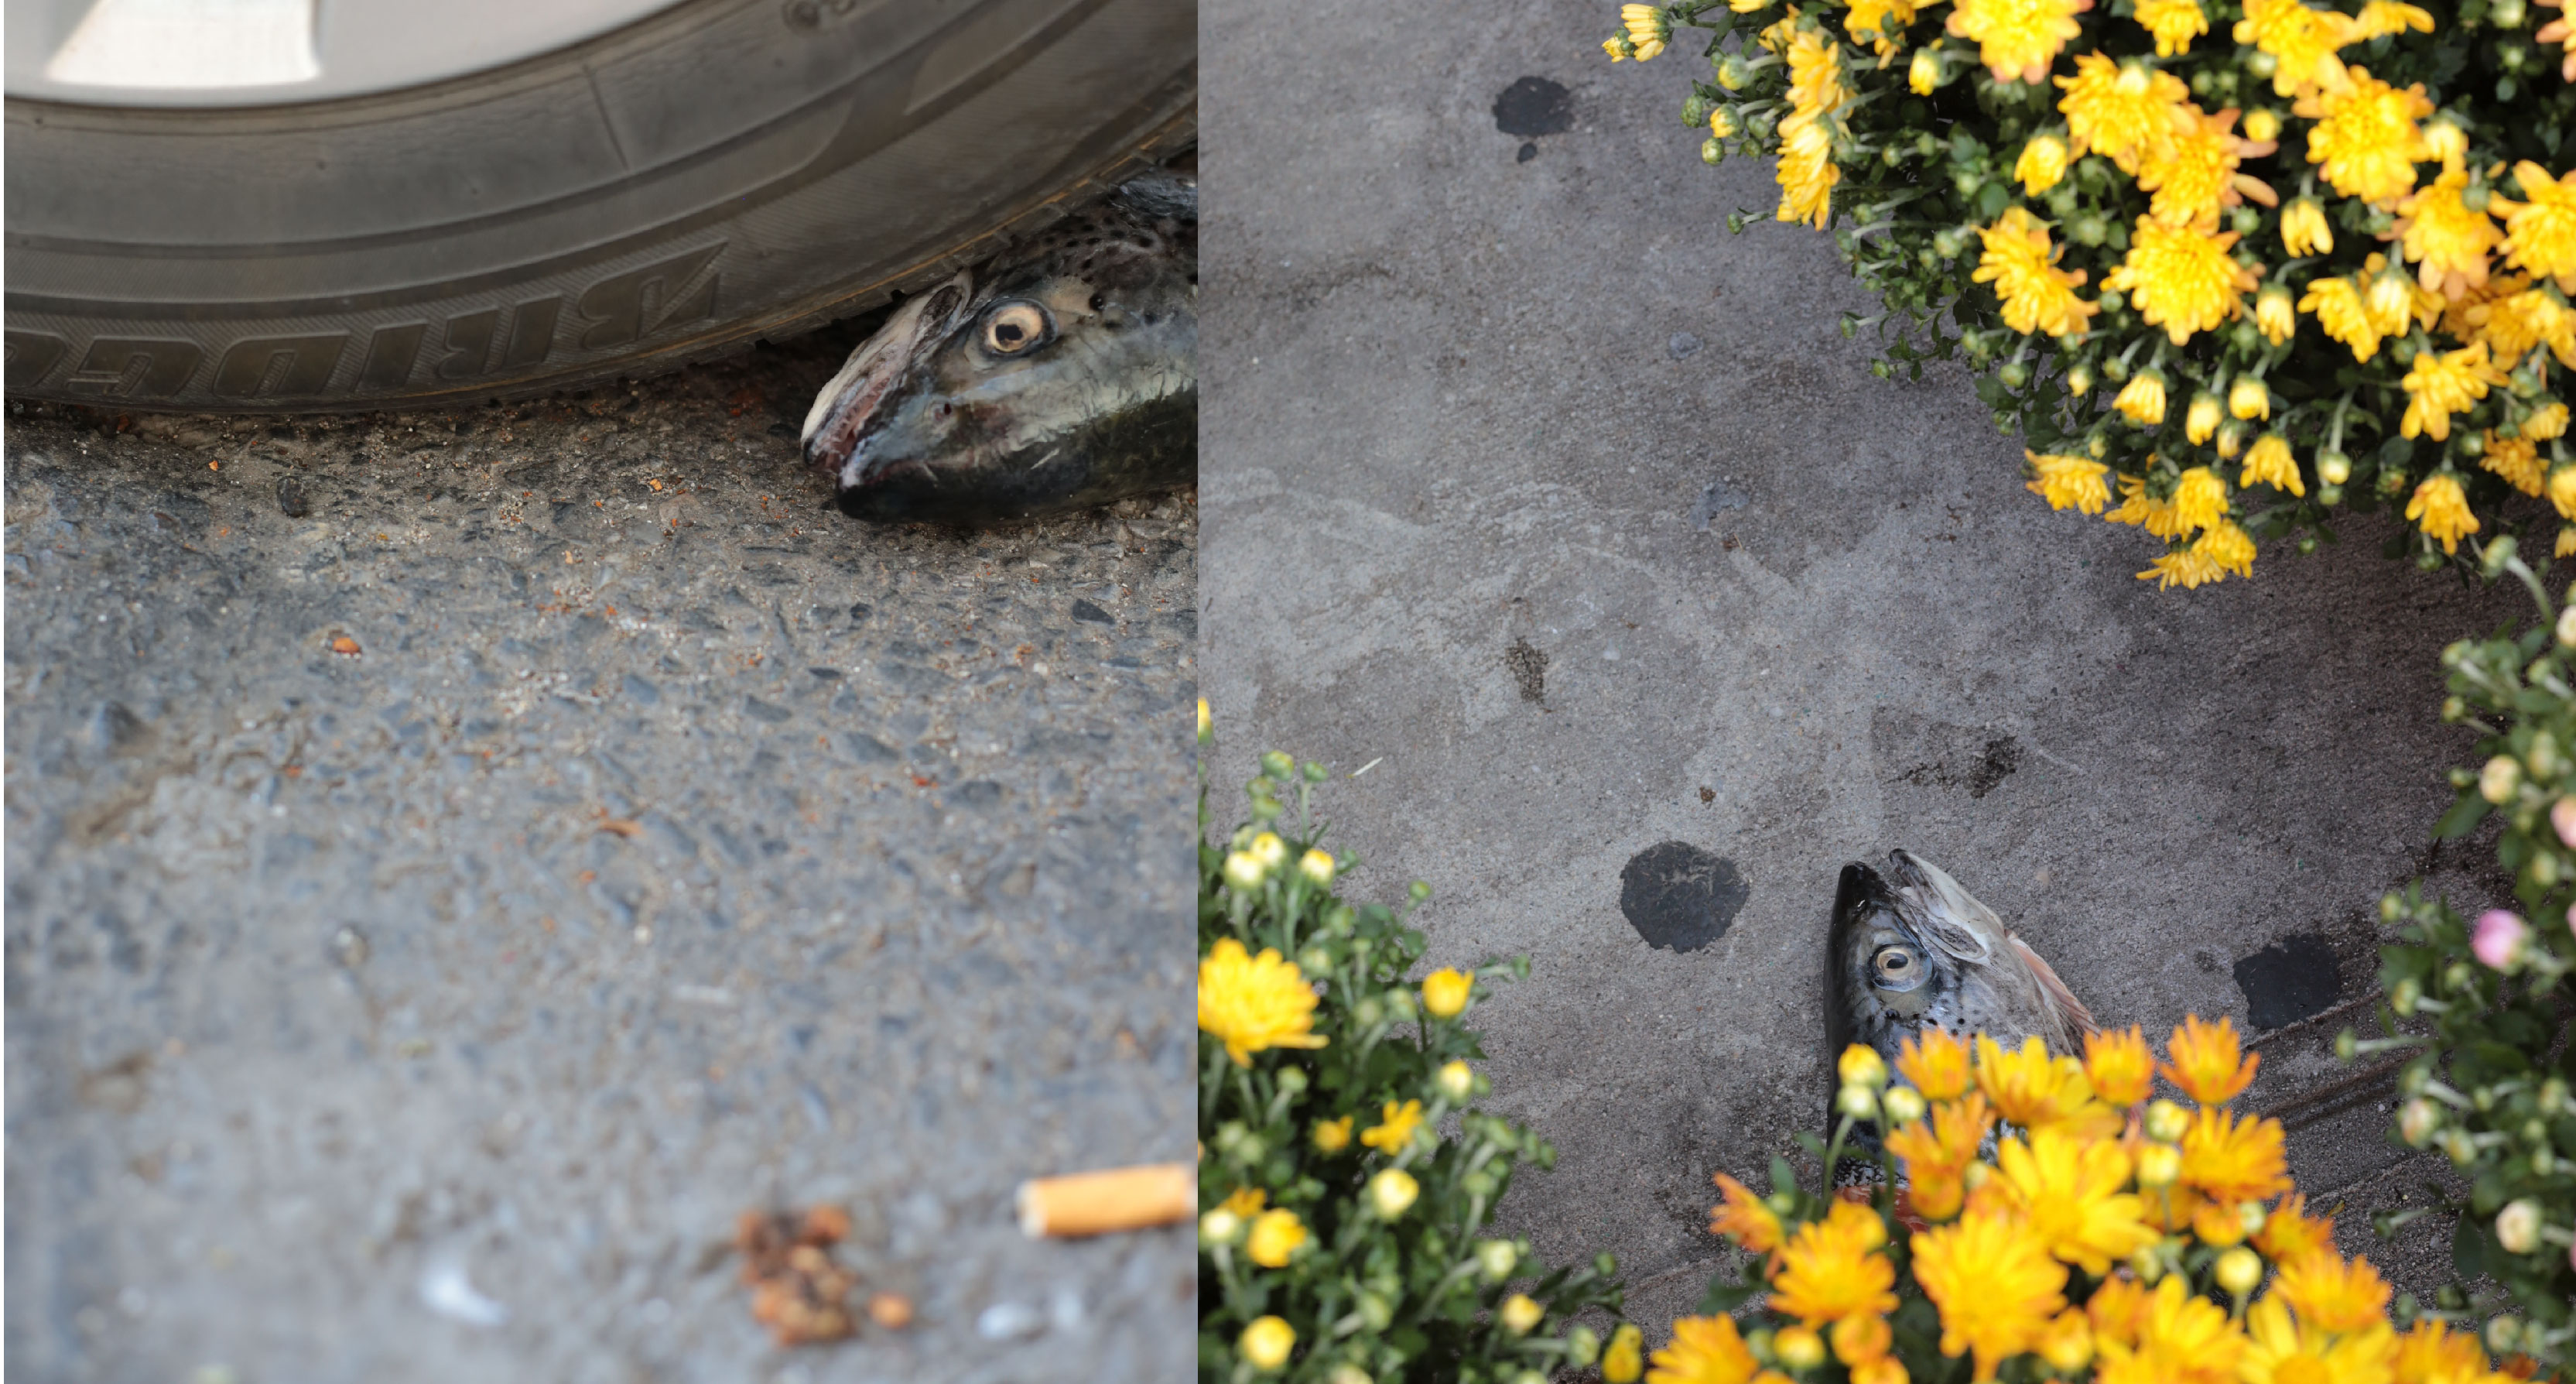 A set of two pictures one with a fish near a car's tire and the other with a fish near some plants.